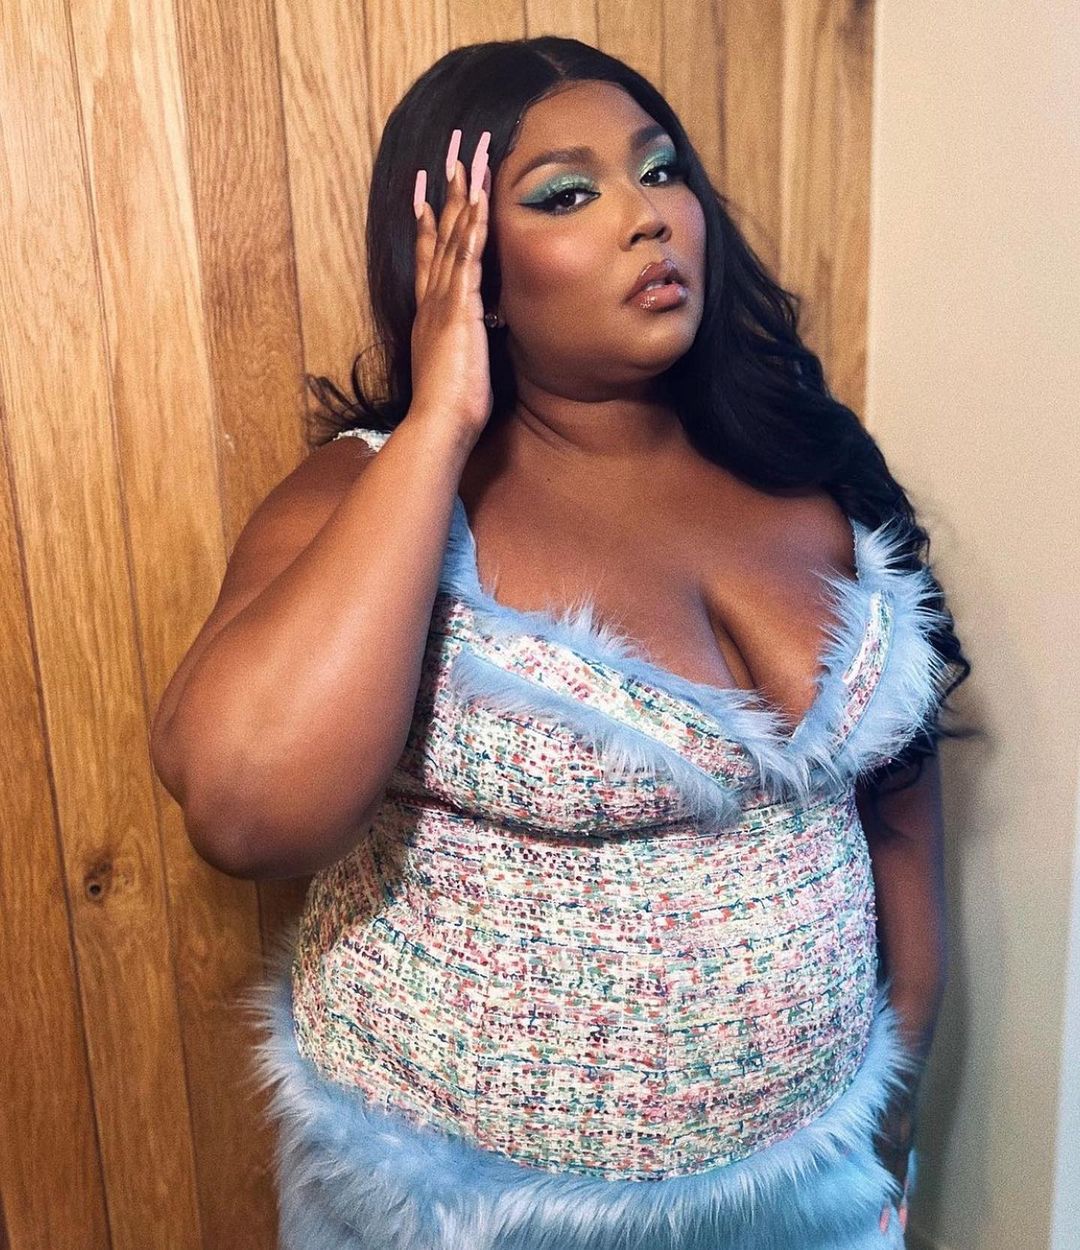 Lizzo, Willow Smith And Lil Kim – This Week’s Best Dressed Celebrities